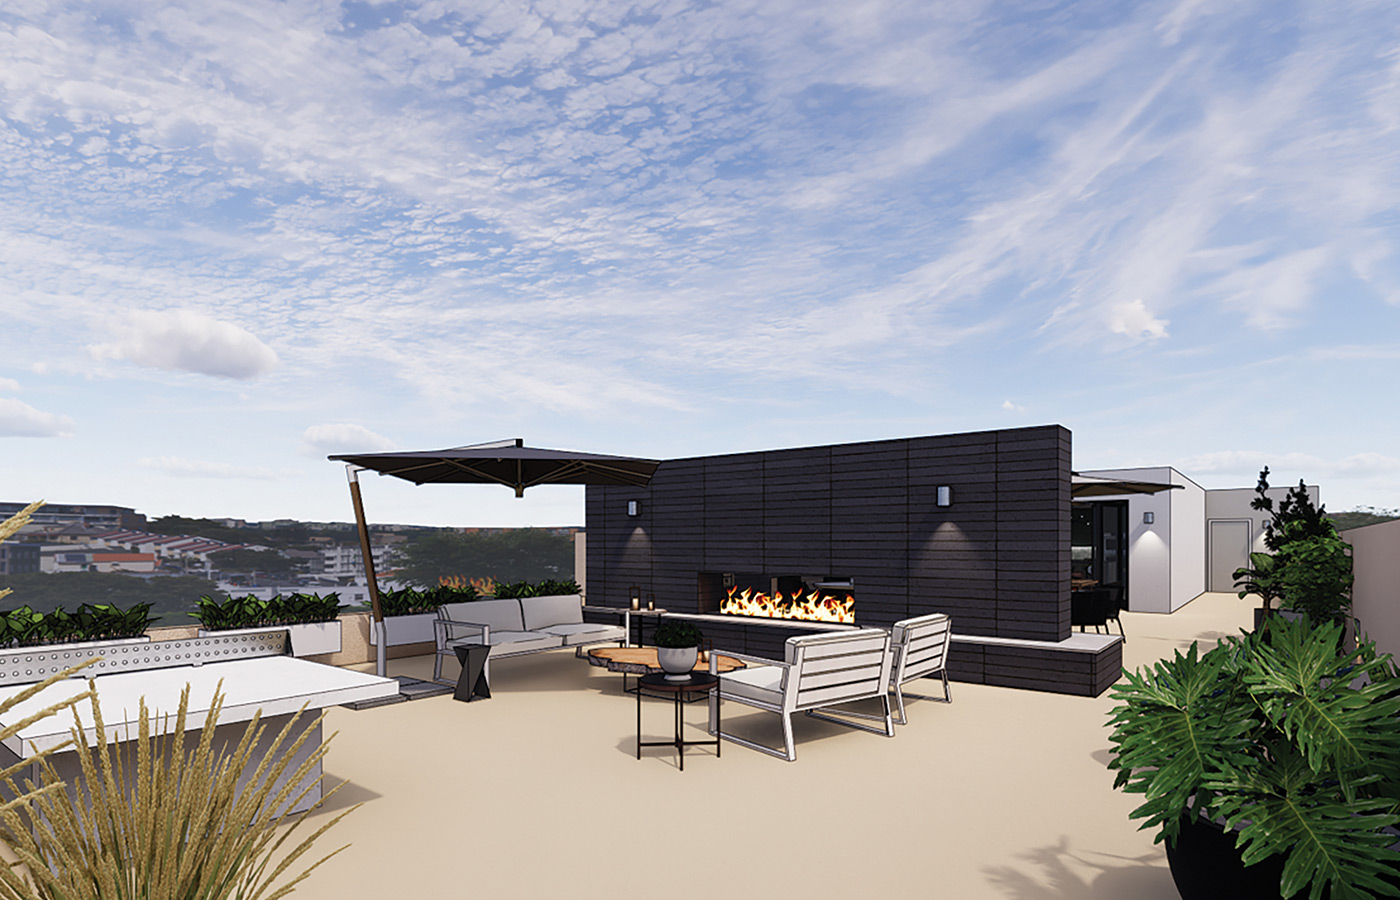 Rooftop area with seating and a fireplace.